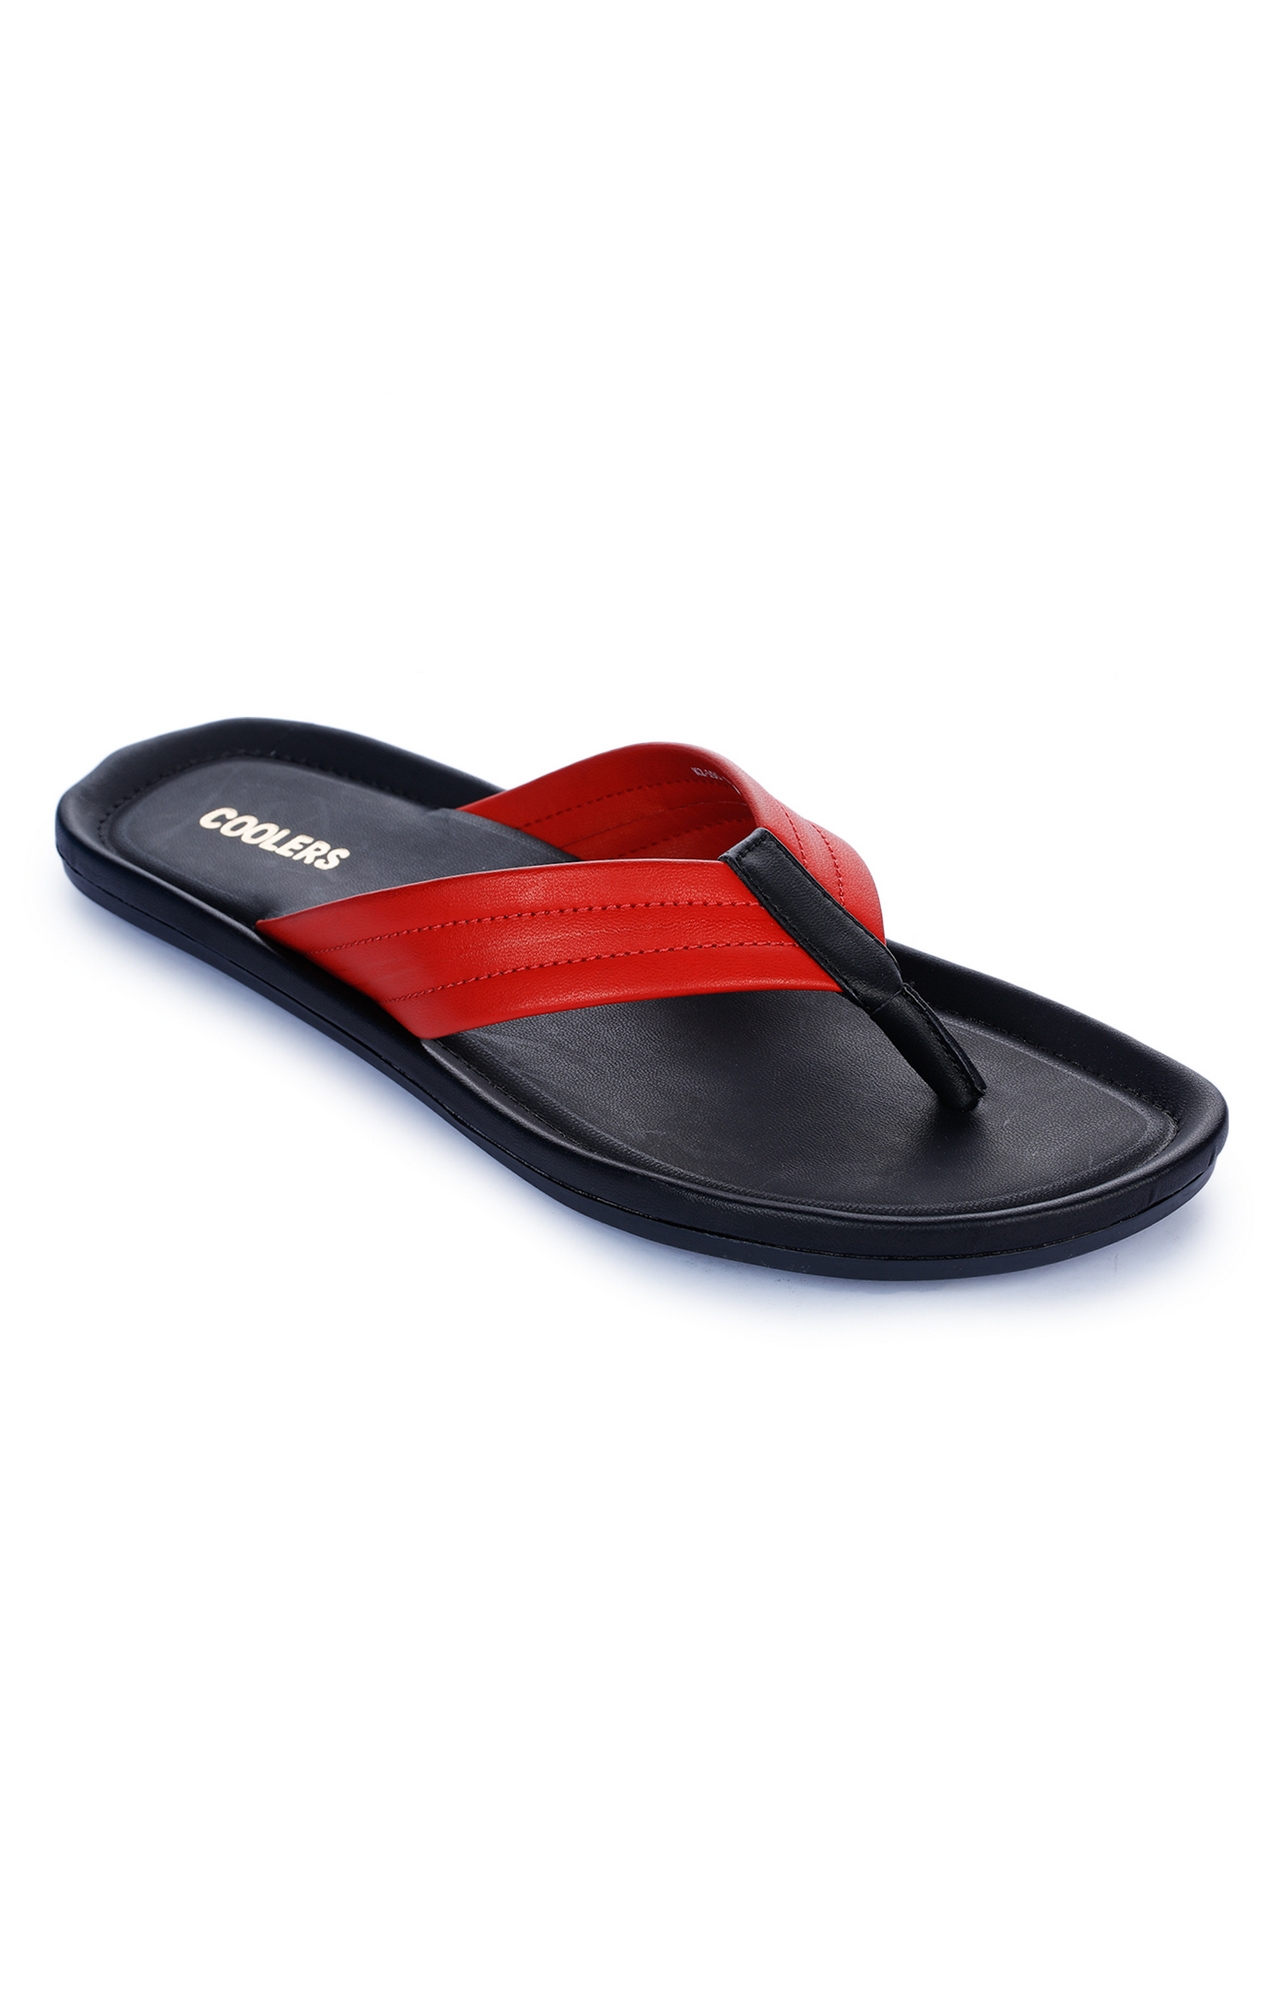 Liberty | Liberty Coolers Red Flip Flops K2-155_Red For - Men